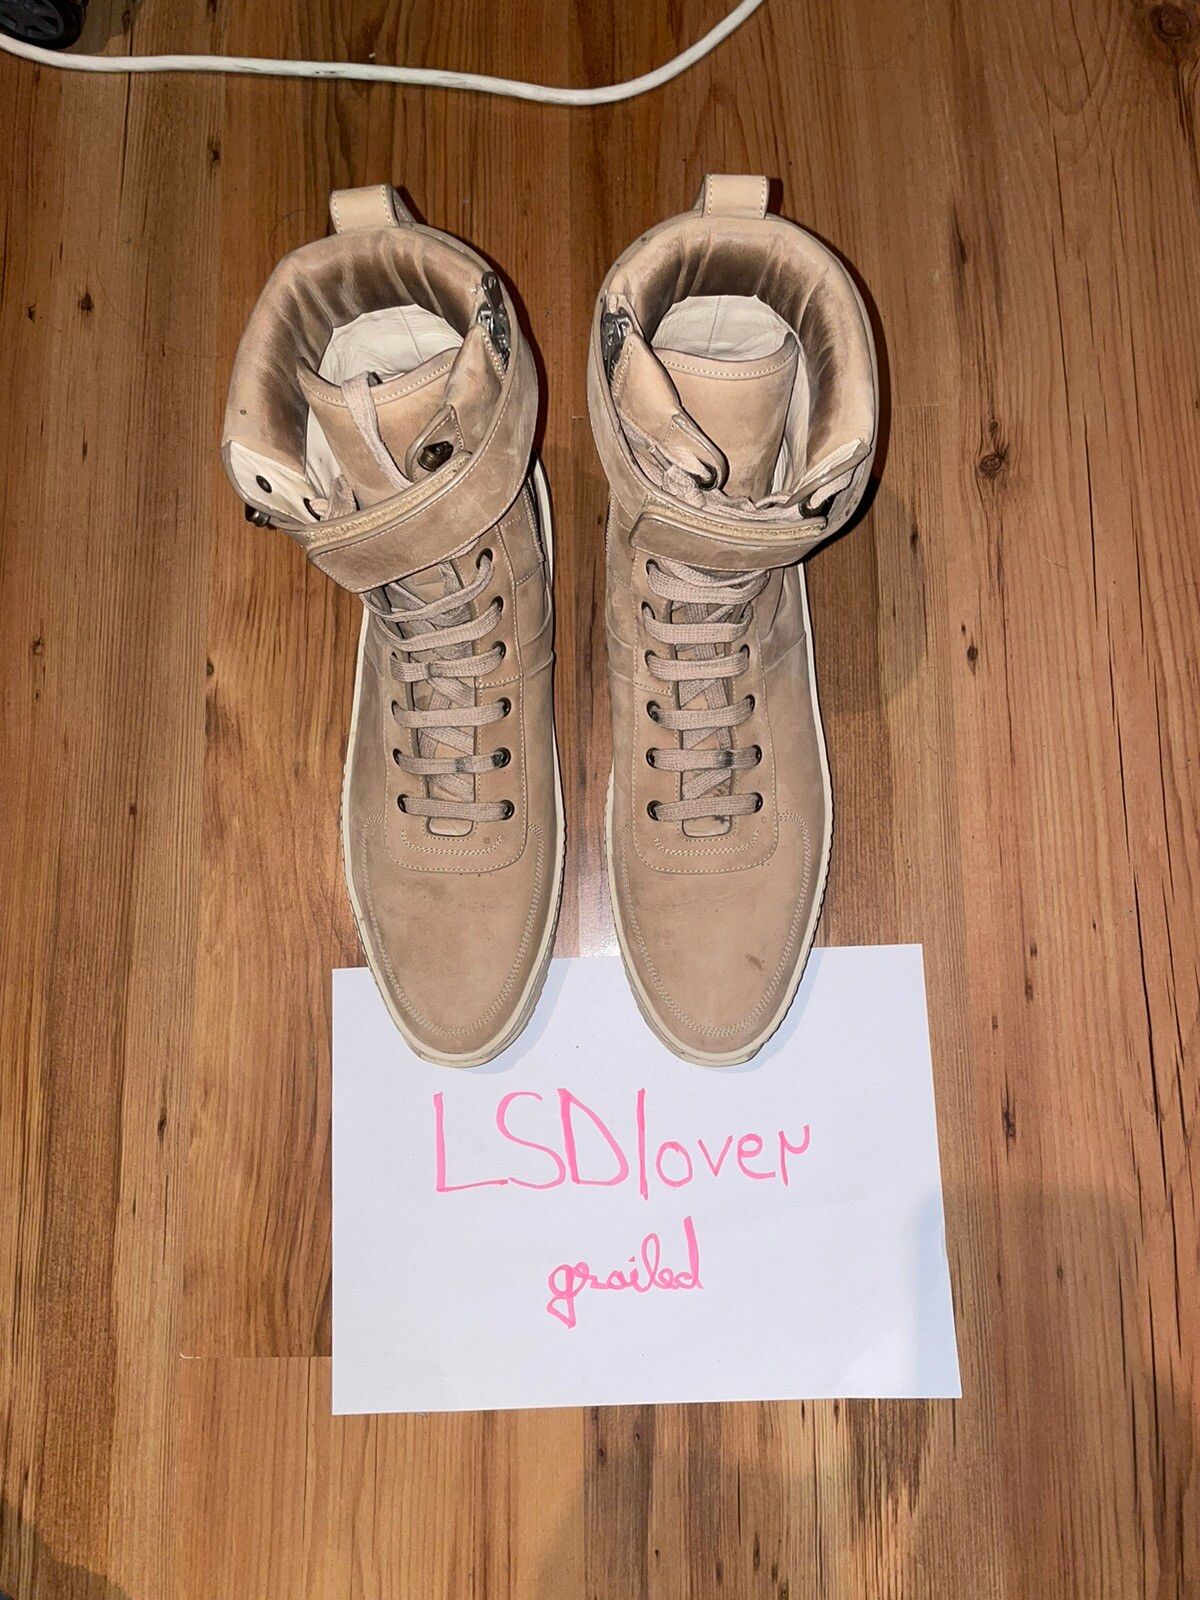 Fear Of God Military Sneakers | Grailed